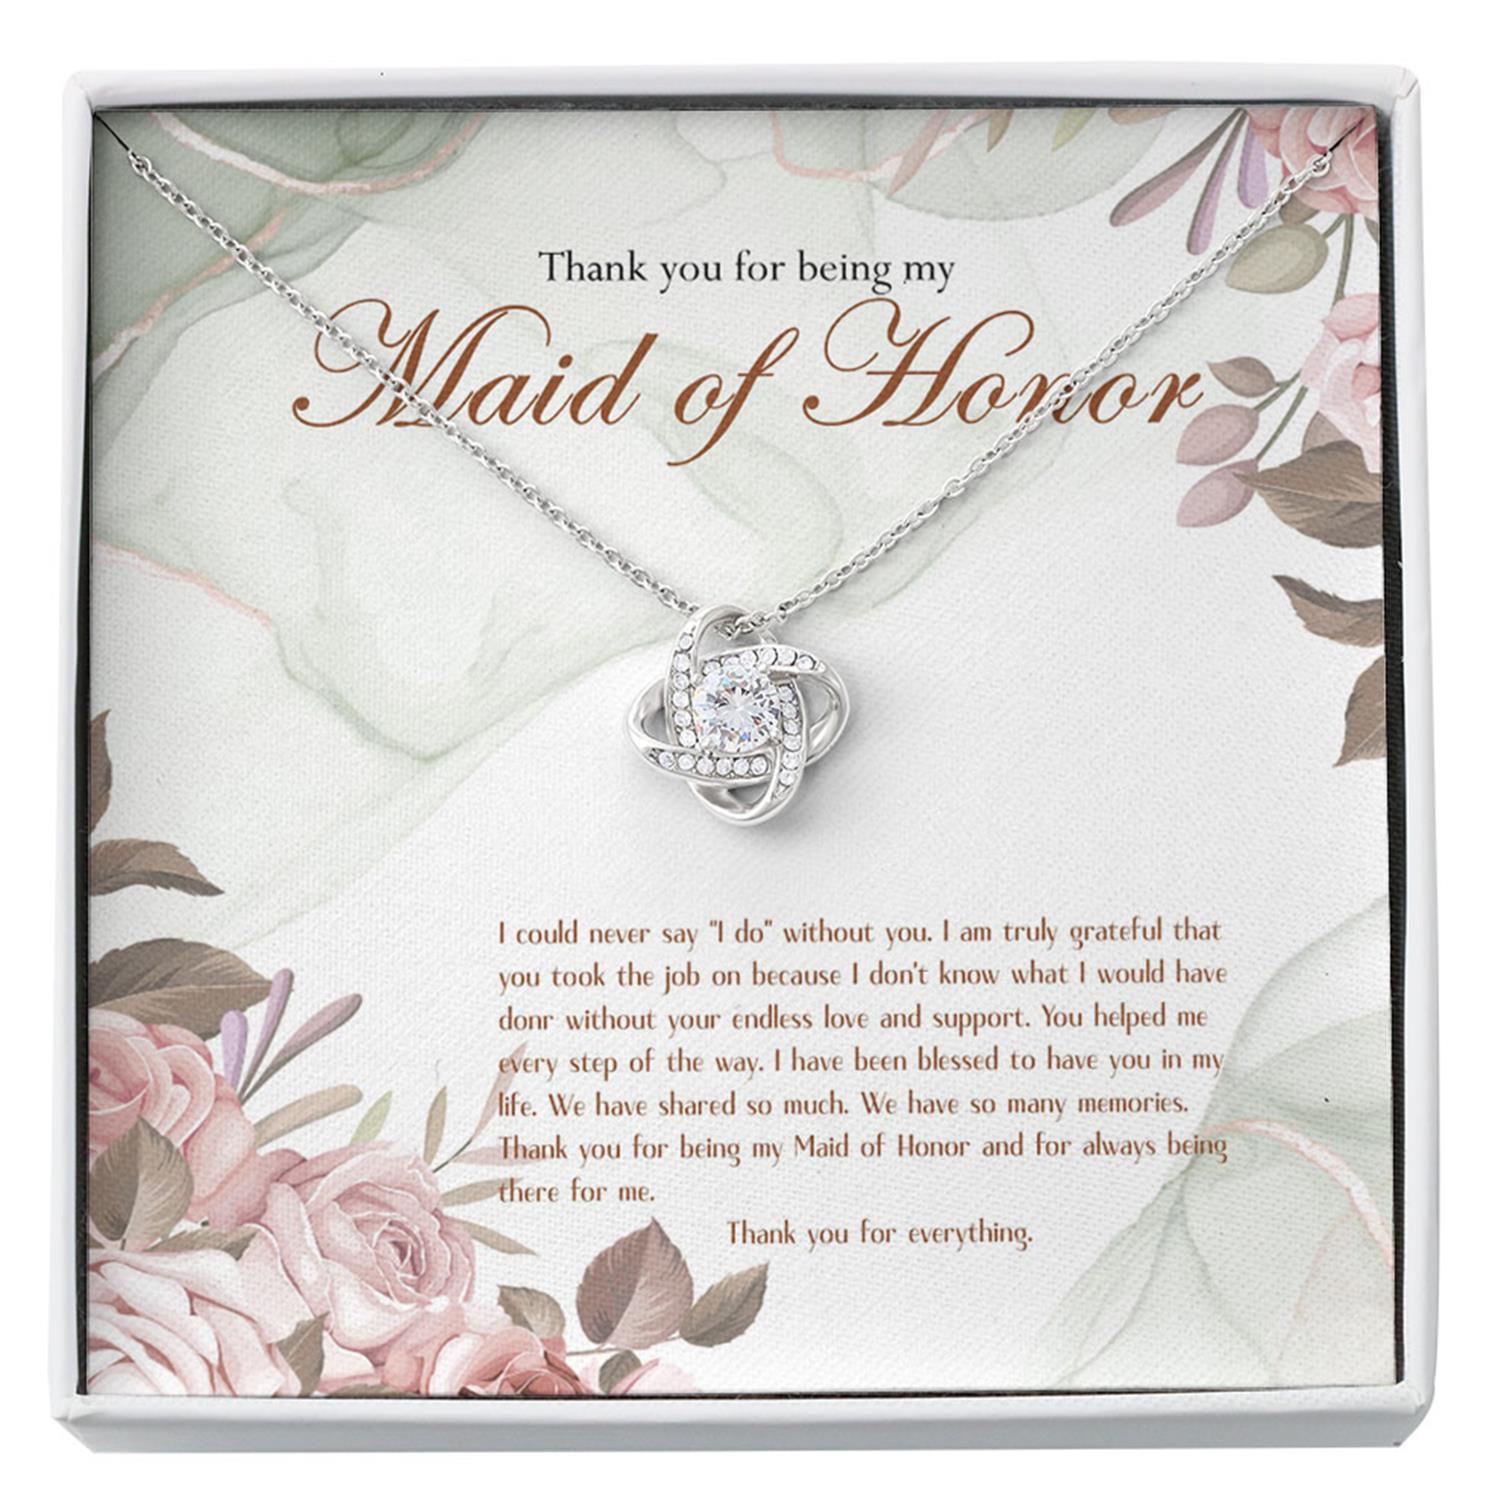 Maid Of Honor Necklace, Maid Of Honor Gift, Thank You Gift From Bride On Wedding Day Custom Necklace